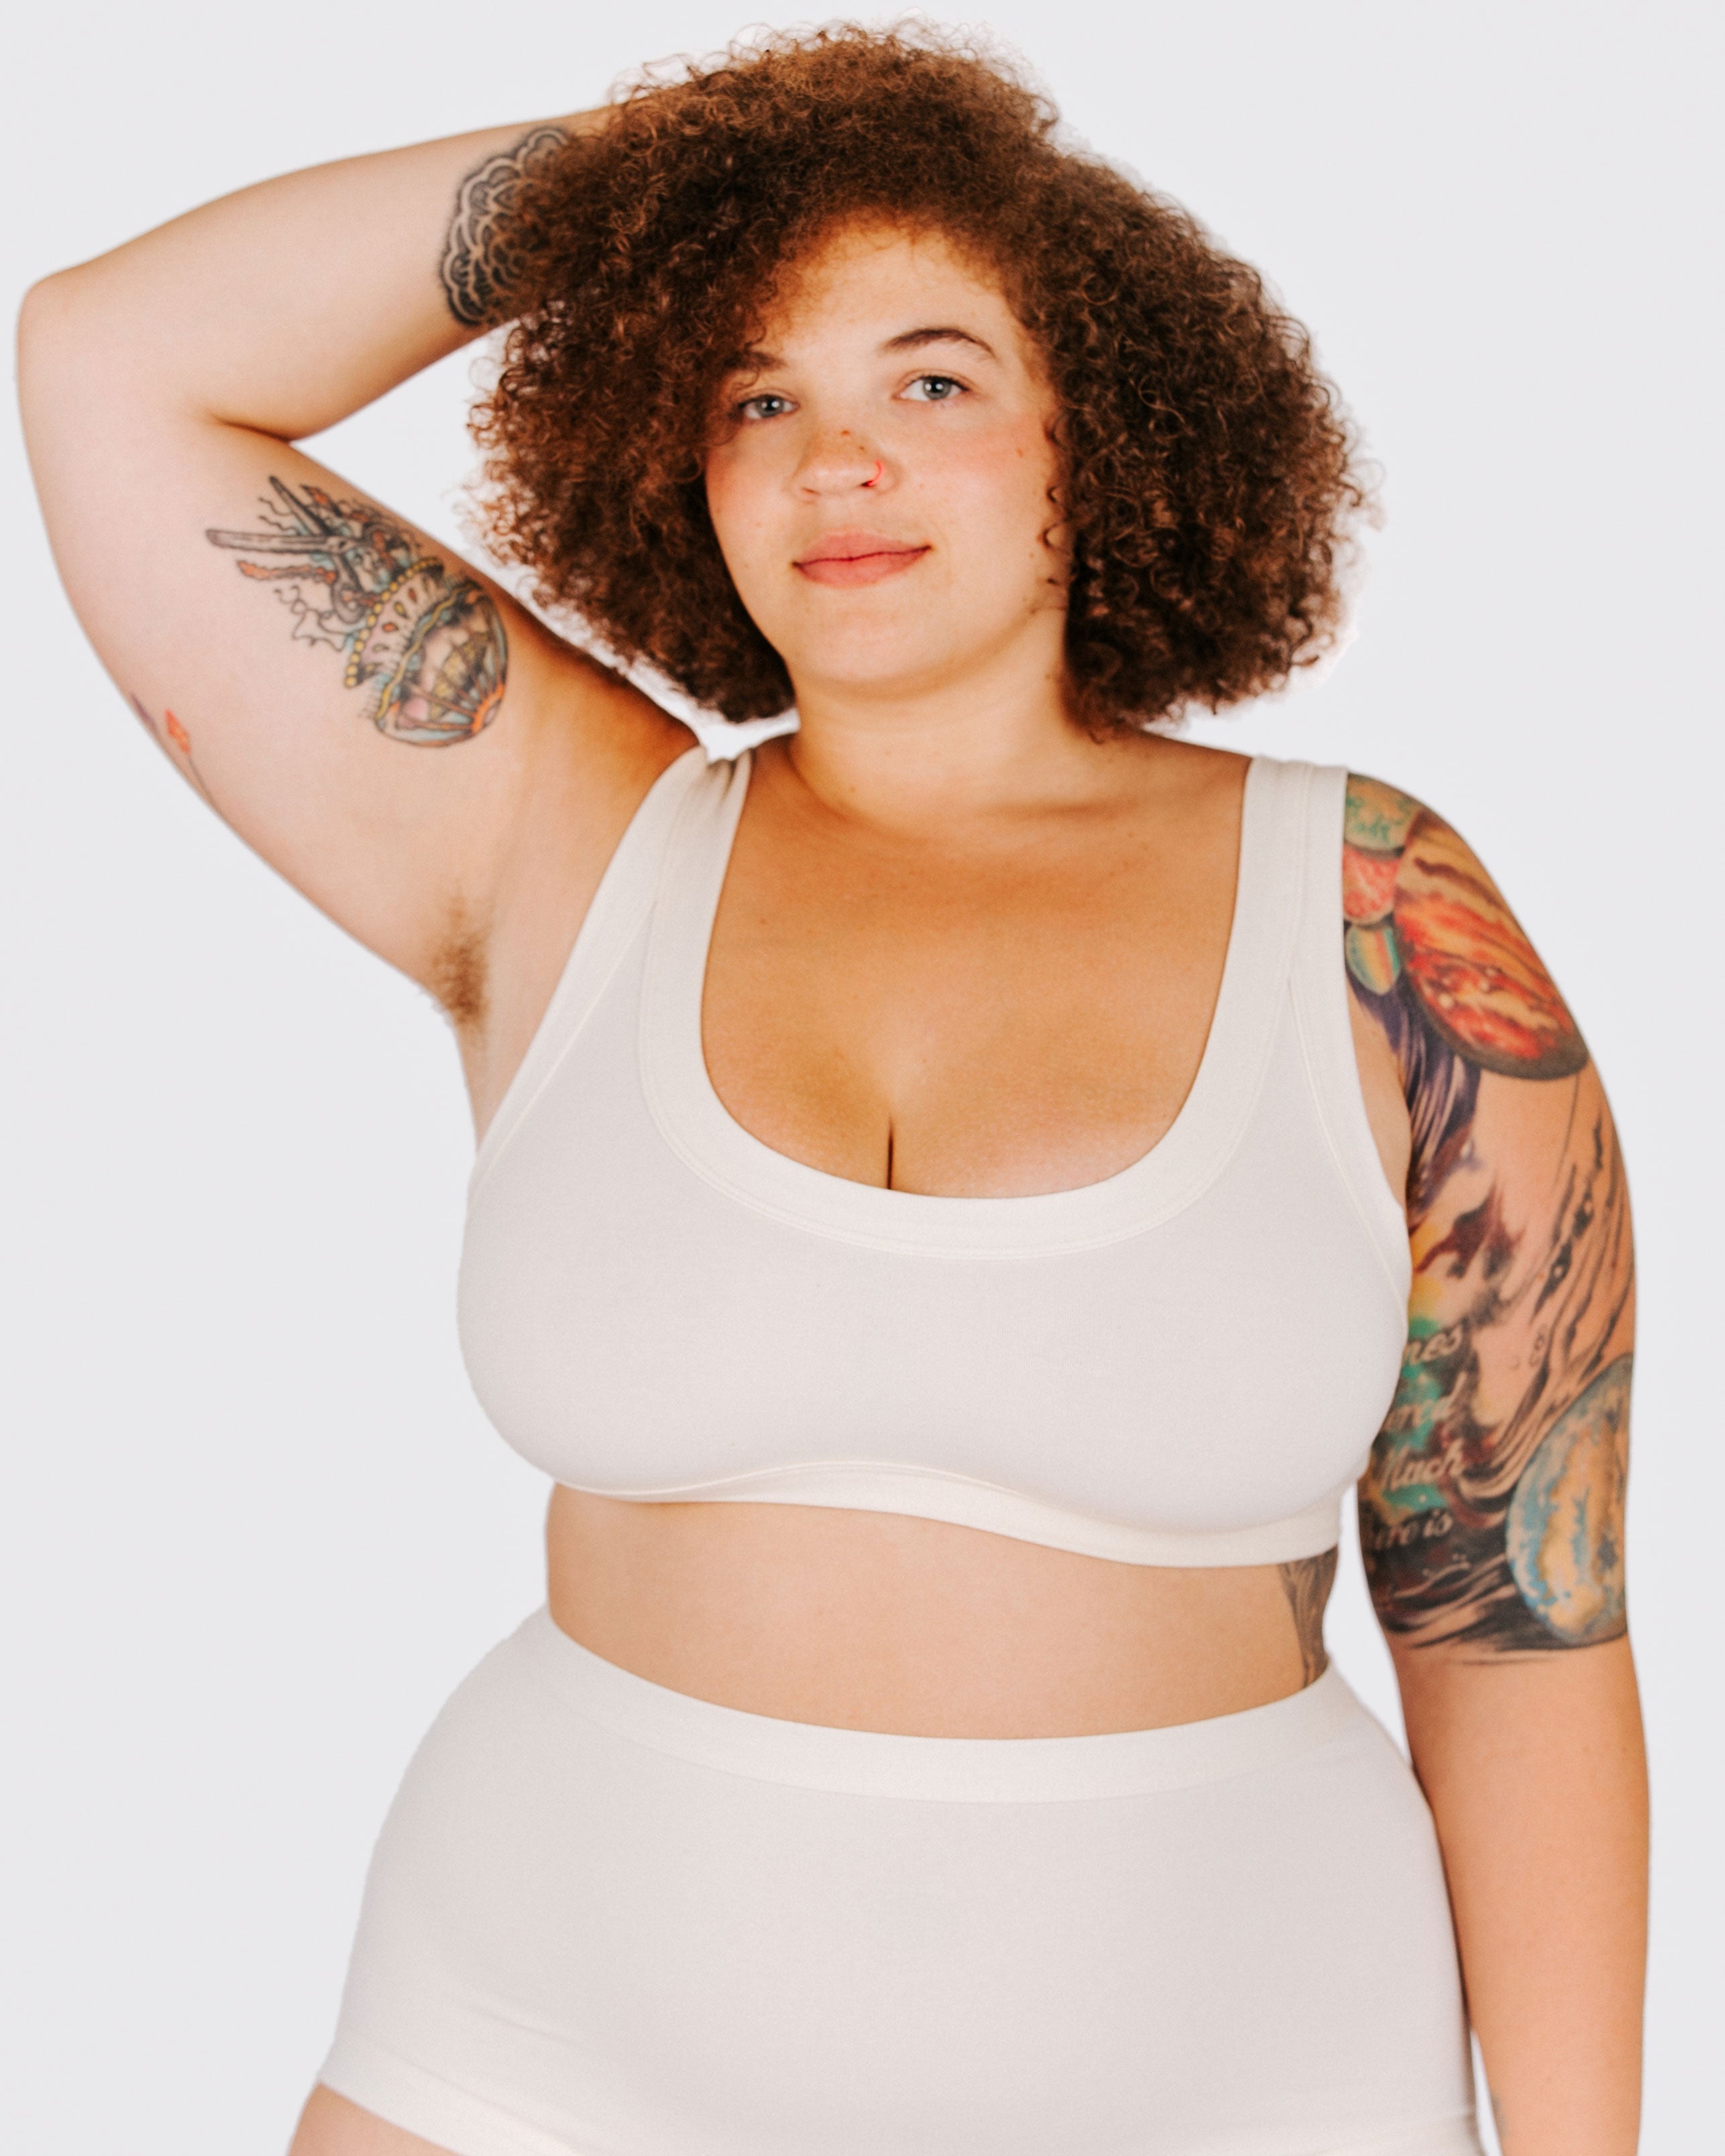 Fit photo from the front of Thunderpants organic cotton Bralette and Original Style underwear in off-white on a model.